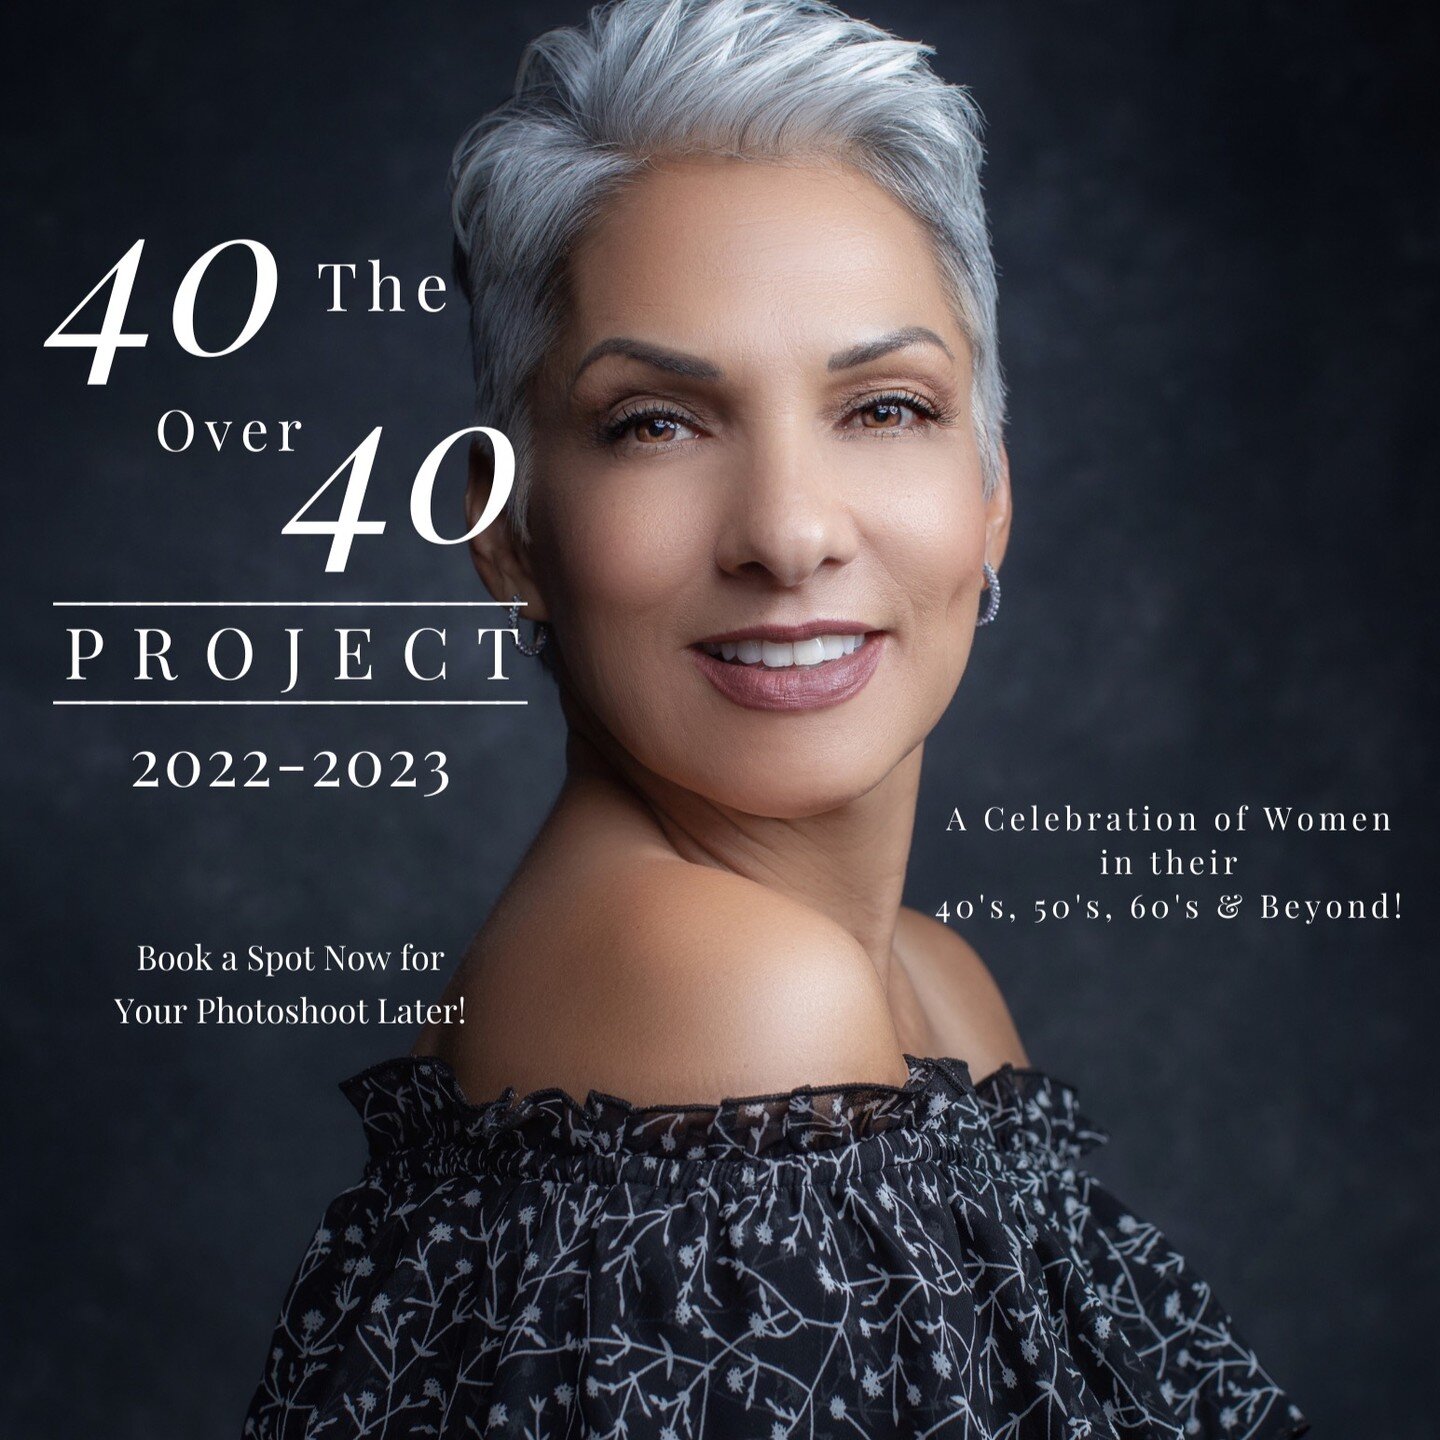 I'm SO excited! You are invited to join my:
40-Over-40 project ~ ❤️ Showcasing ageless beauty &amp; wisdom that comes with maturing! ** Seeking women in their 40s, 50s, 60s, 70s &amp; beyond! 
.
** Booking Orlando photoshoot dates: July - October.
.
